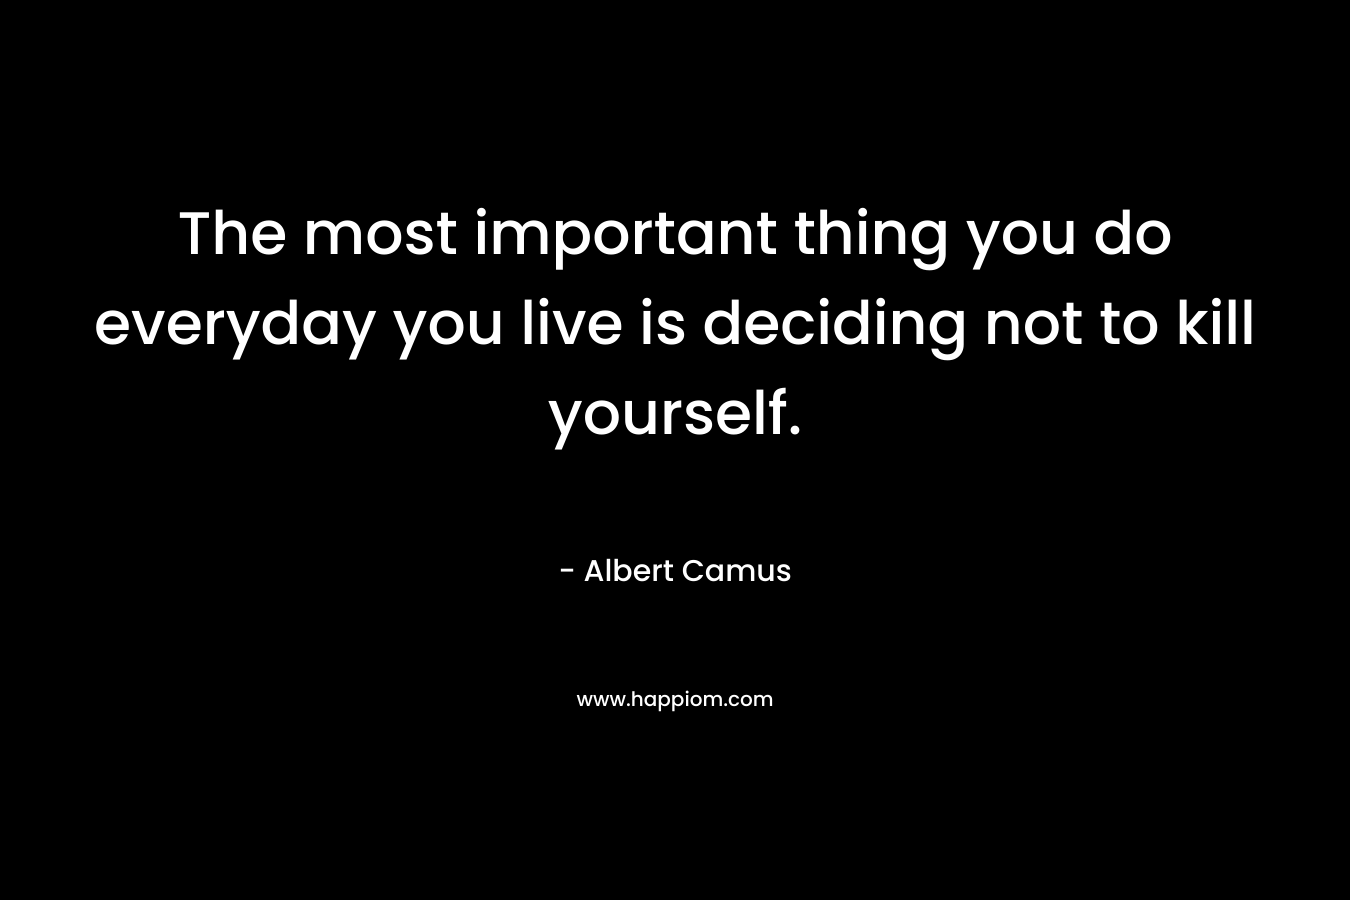 The most important thing you do everyday you live is deciding not to kill yourself. – Albert Camus